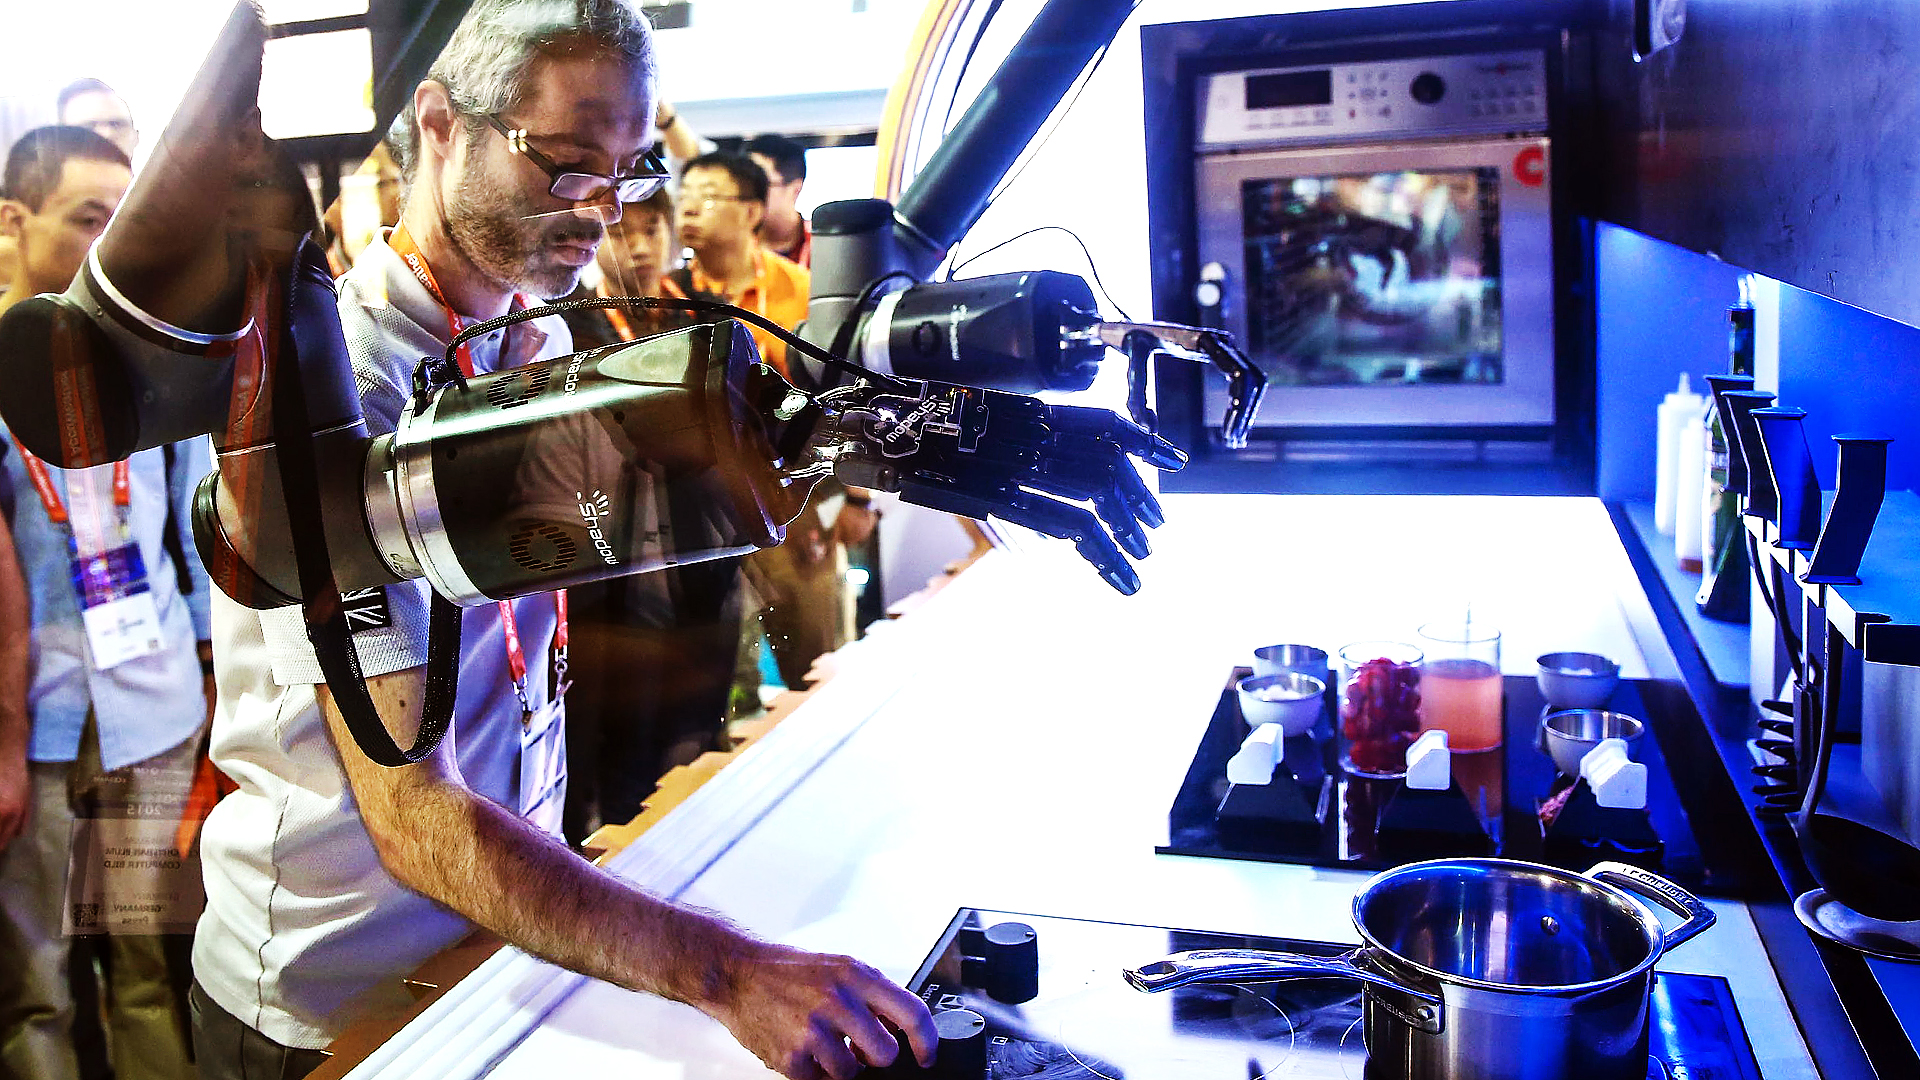 Moley Robotics' automated kitchen cooks for attendees at CES Asia in Shanghai. Photo: AFP